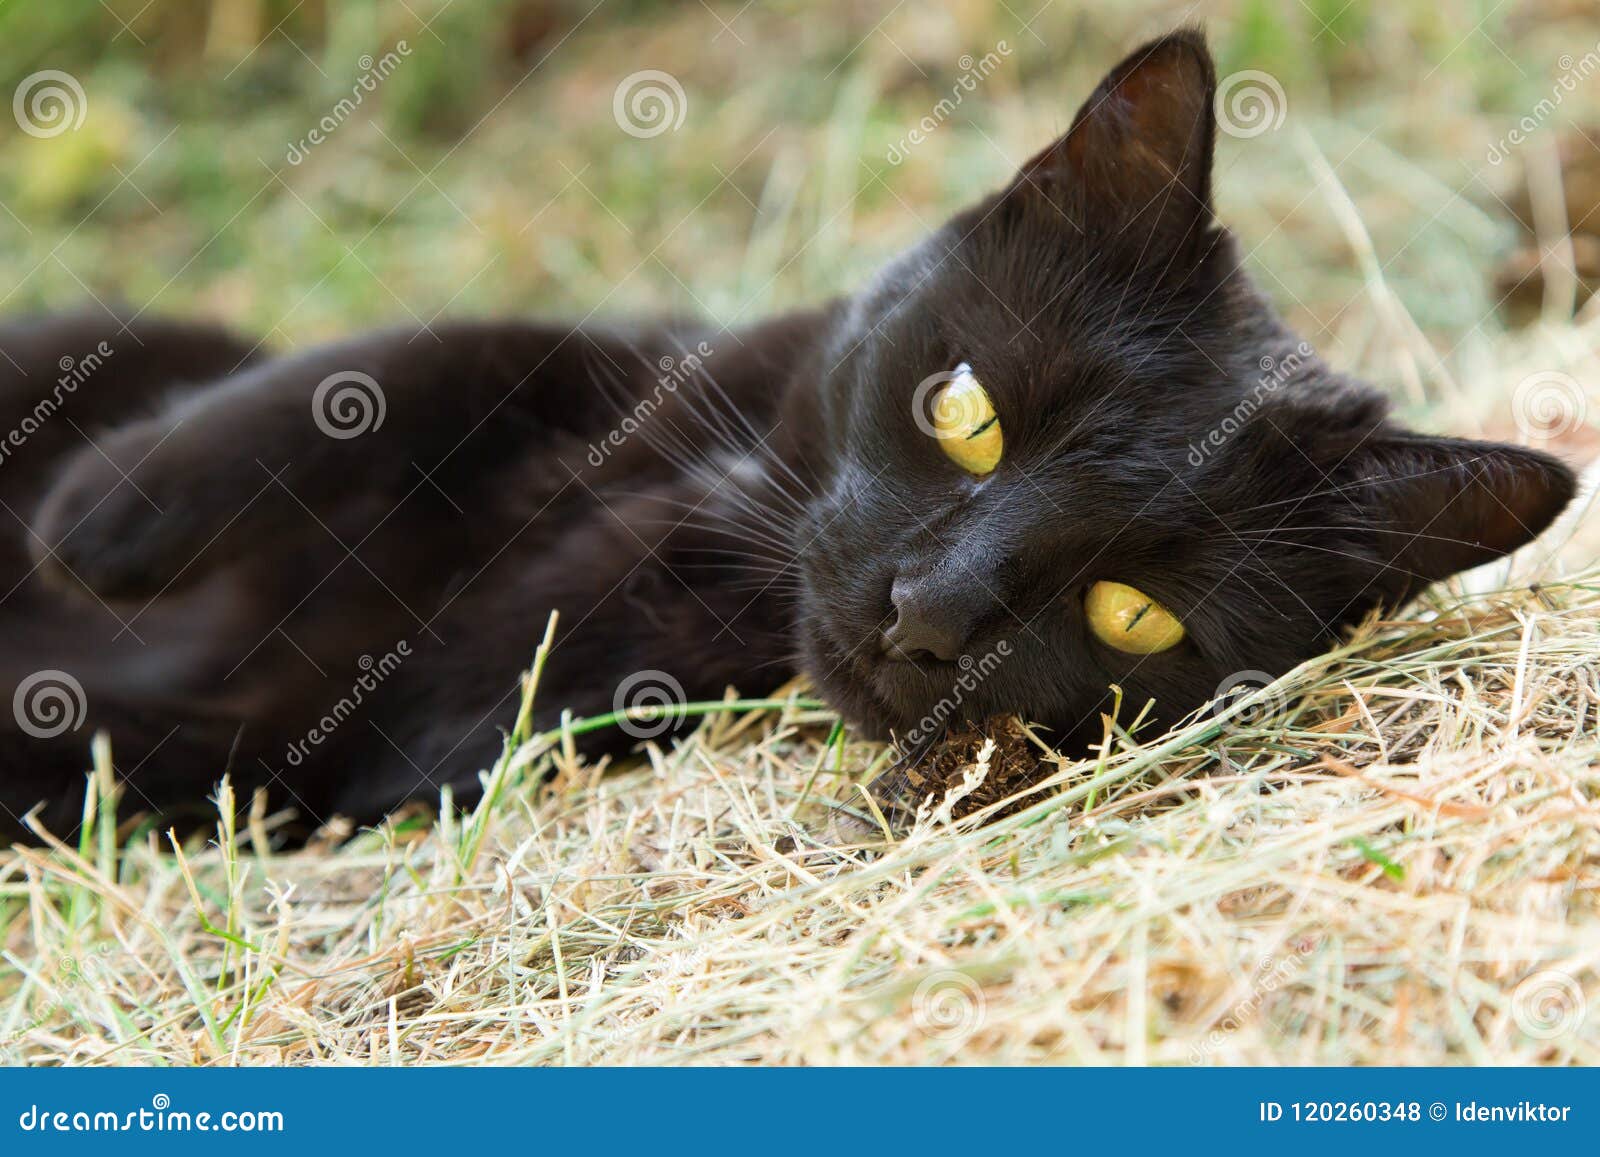 beautiful cute black bombay cat with yellow eyes lies outdoors. portrait closeup